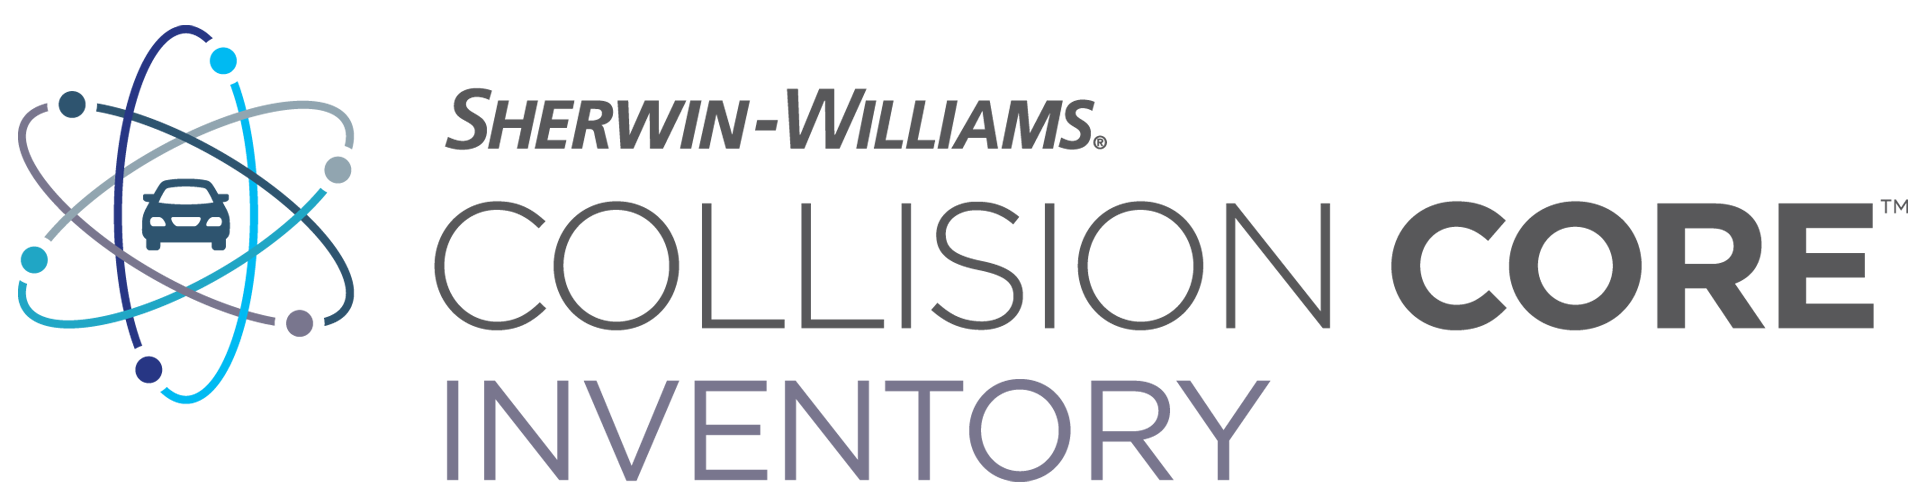 Sherwin-Williams Collision Core Inventory Inventory